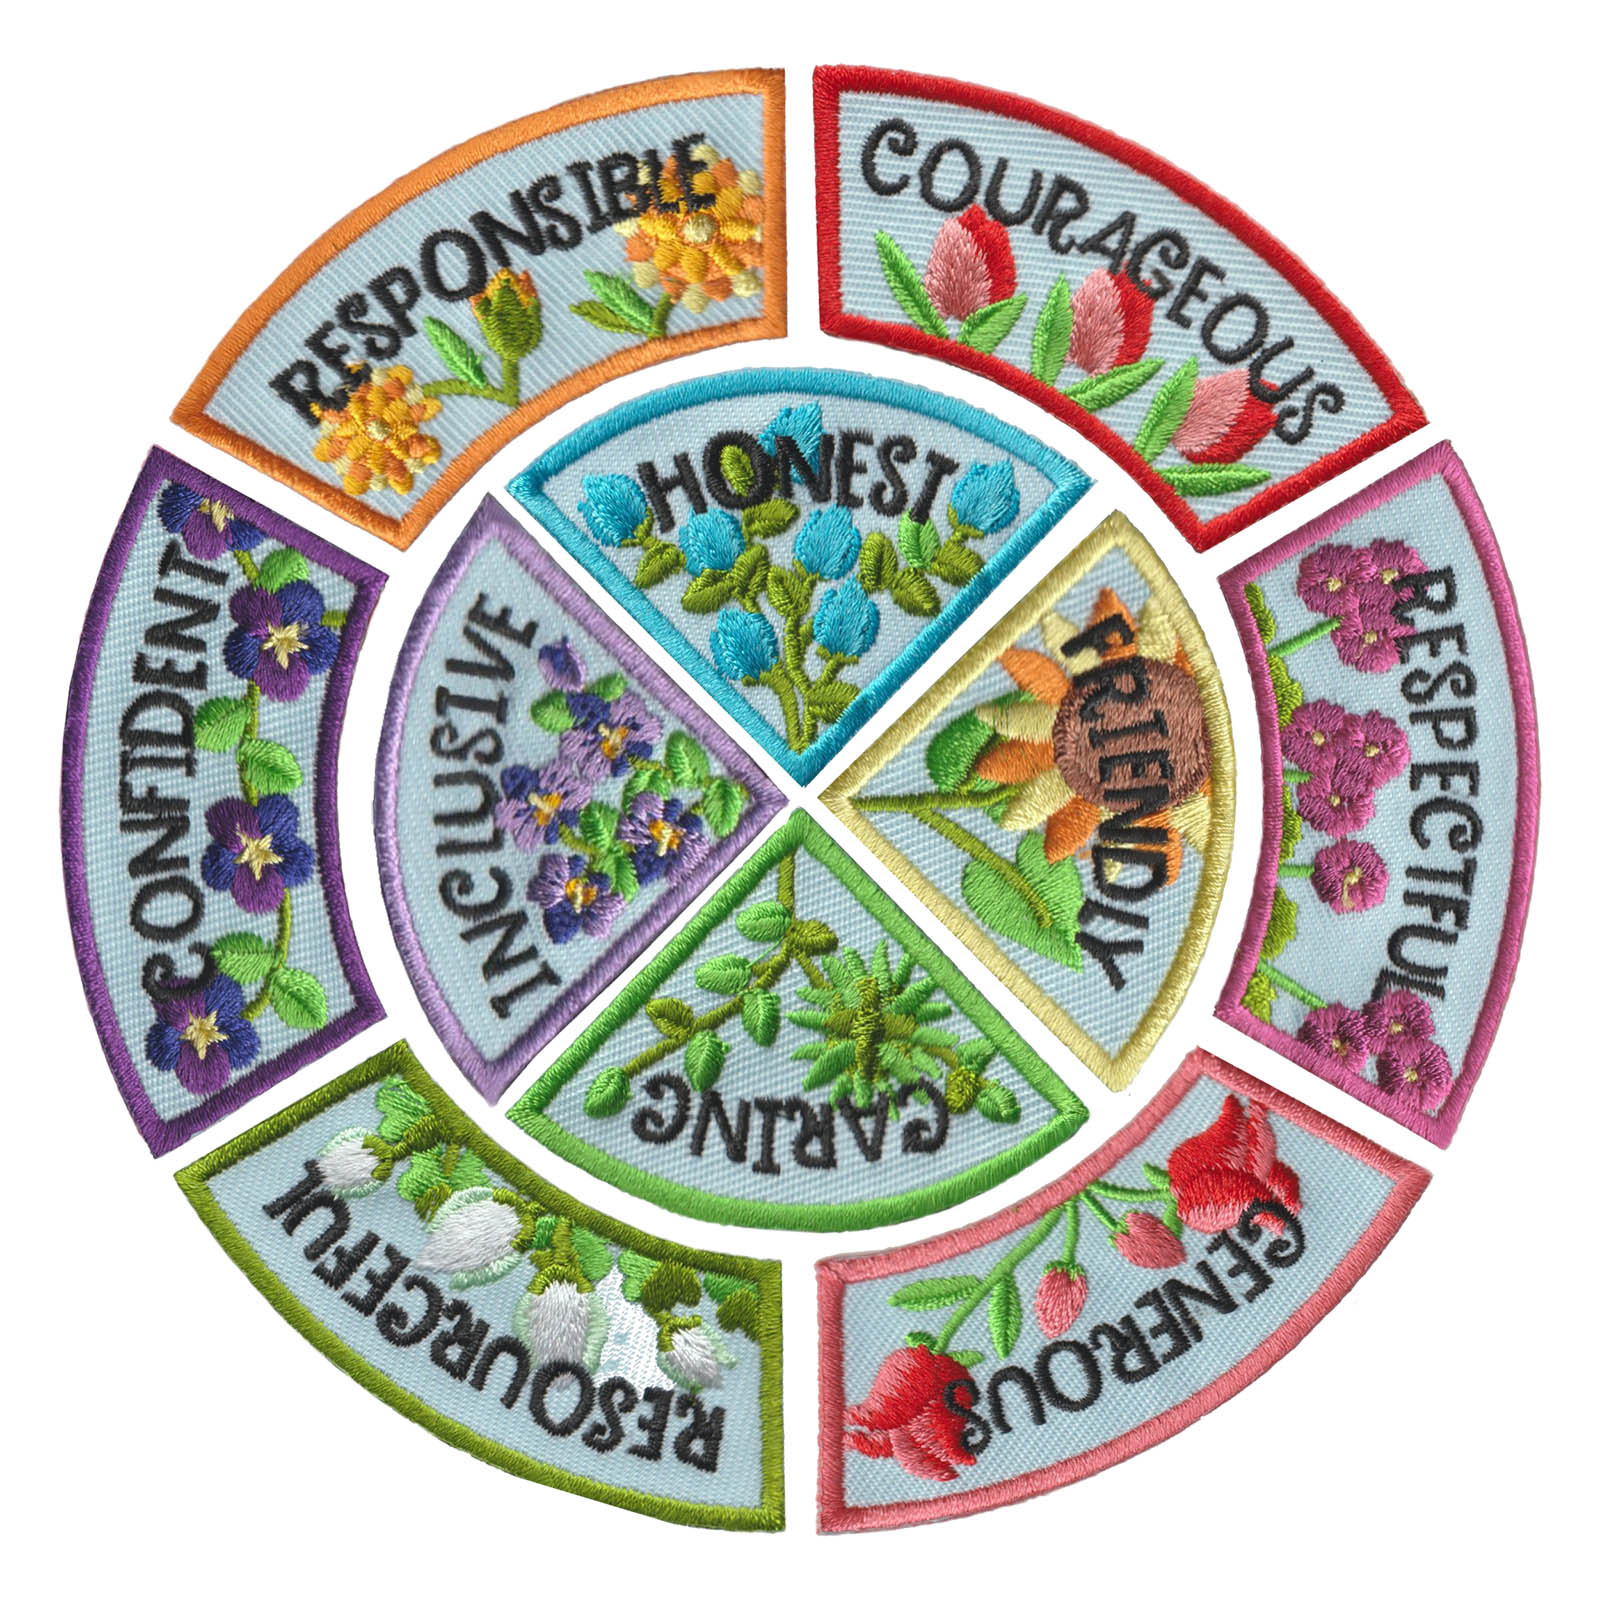 Girl Scout Character Building Patch Program®